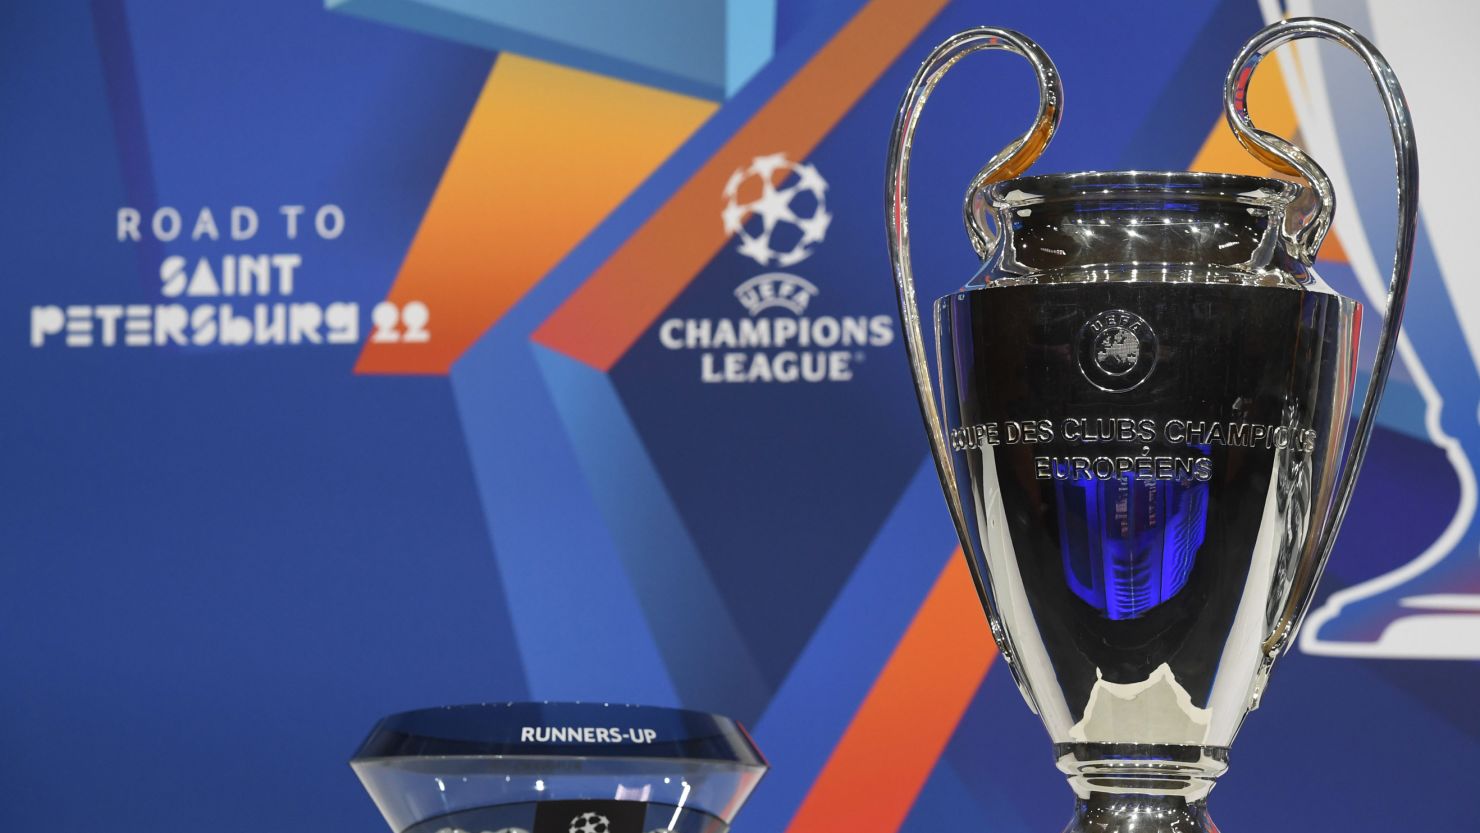 A view of the UEFA Champions League trophy during the 2021/22 Round of 16 Draw at UEFA headquarters on December 13, 2021.